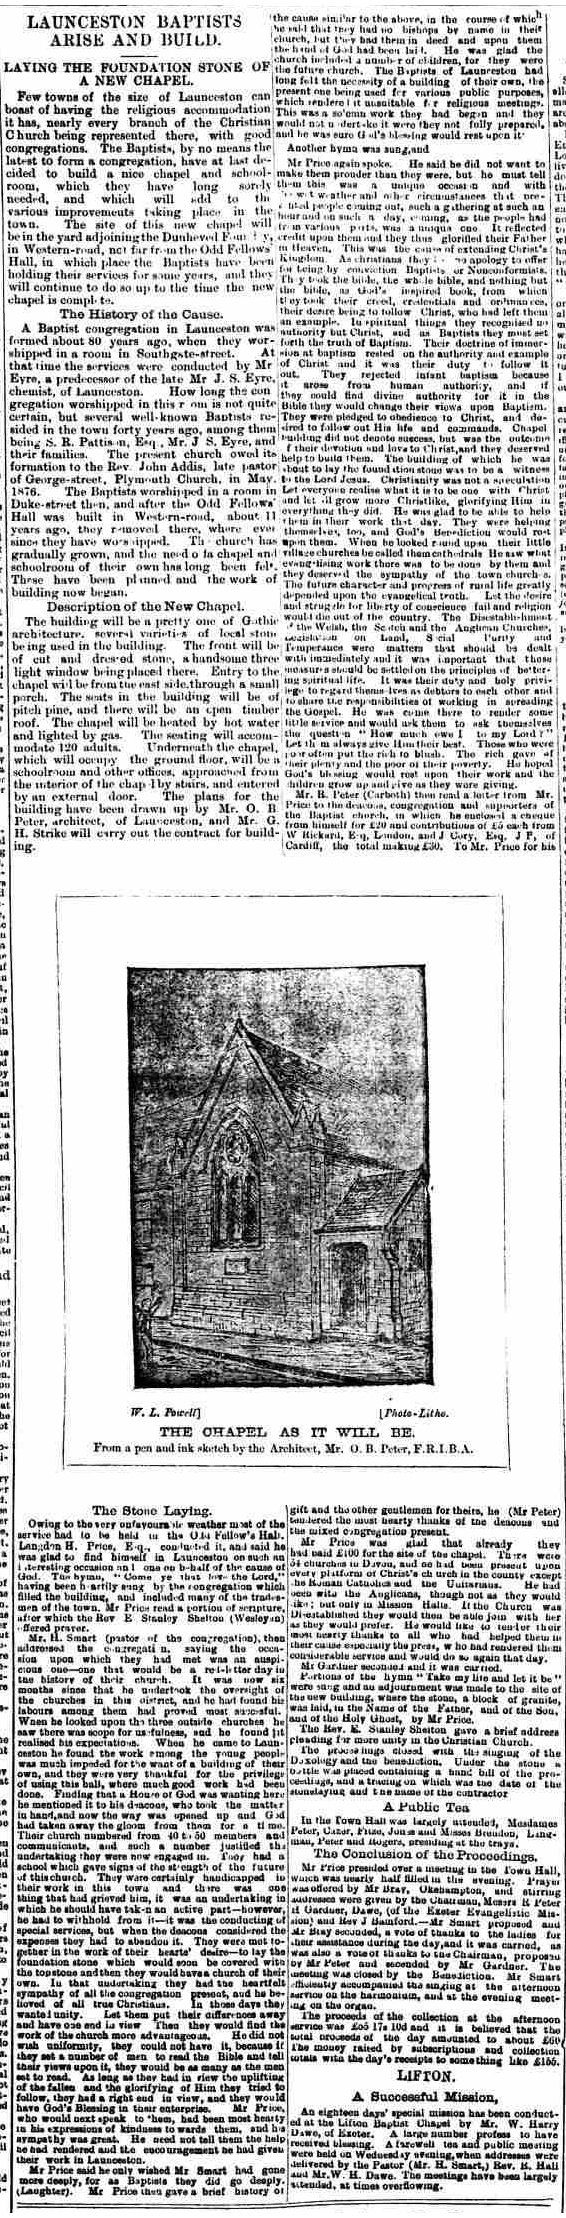 Baptist Church, Western Road article18 March 1892